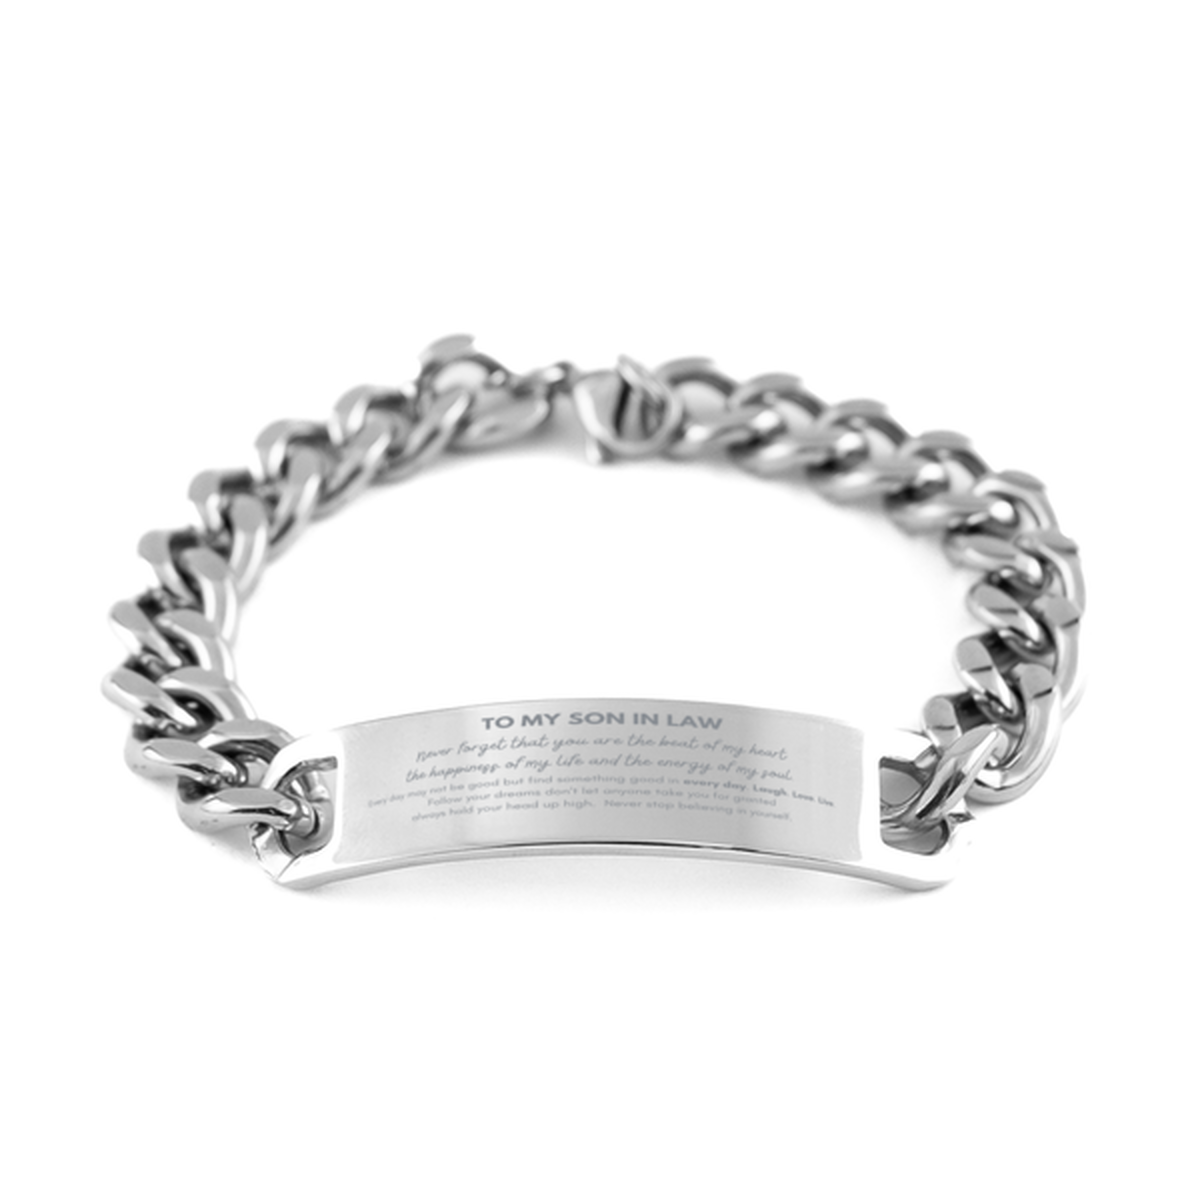 To My Son In Law Bracelet Gifts, Christmas Son In Law Cuban Chain Stainless Steel Bracelet Present, Birthday Unique Motivational For Son In Law, To My Son In Law Never forget that you are the beat of my heart the happiness of my life and the energy of my